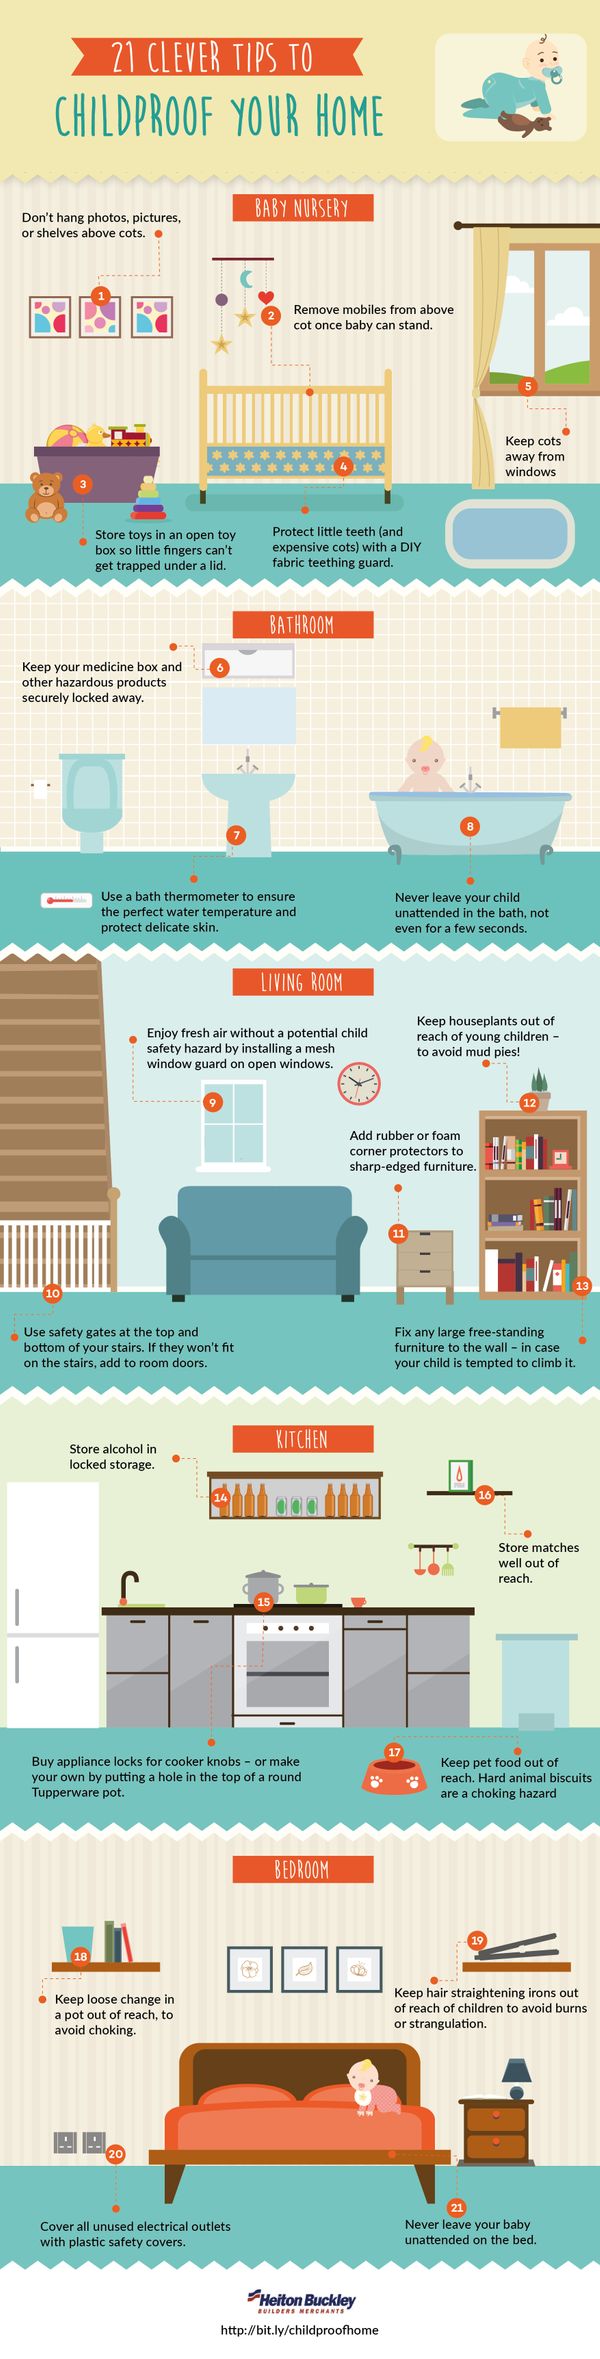 21-clever-tips-to-childproof-your-home